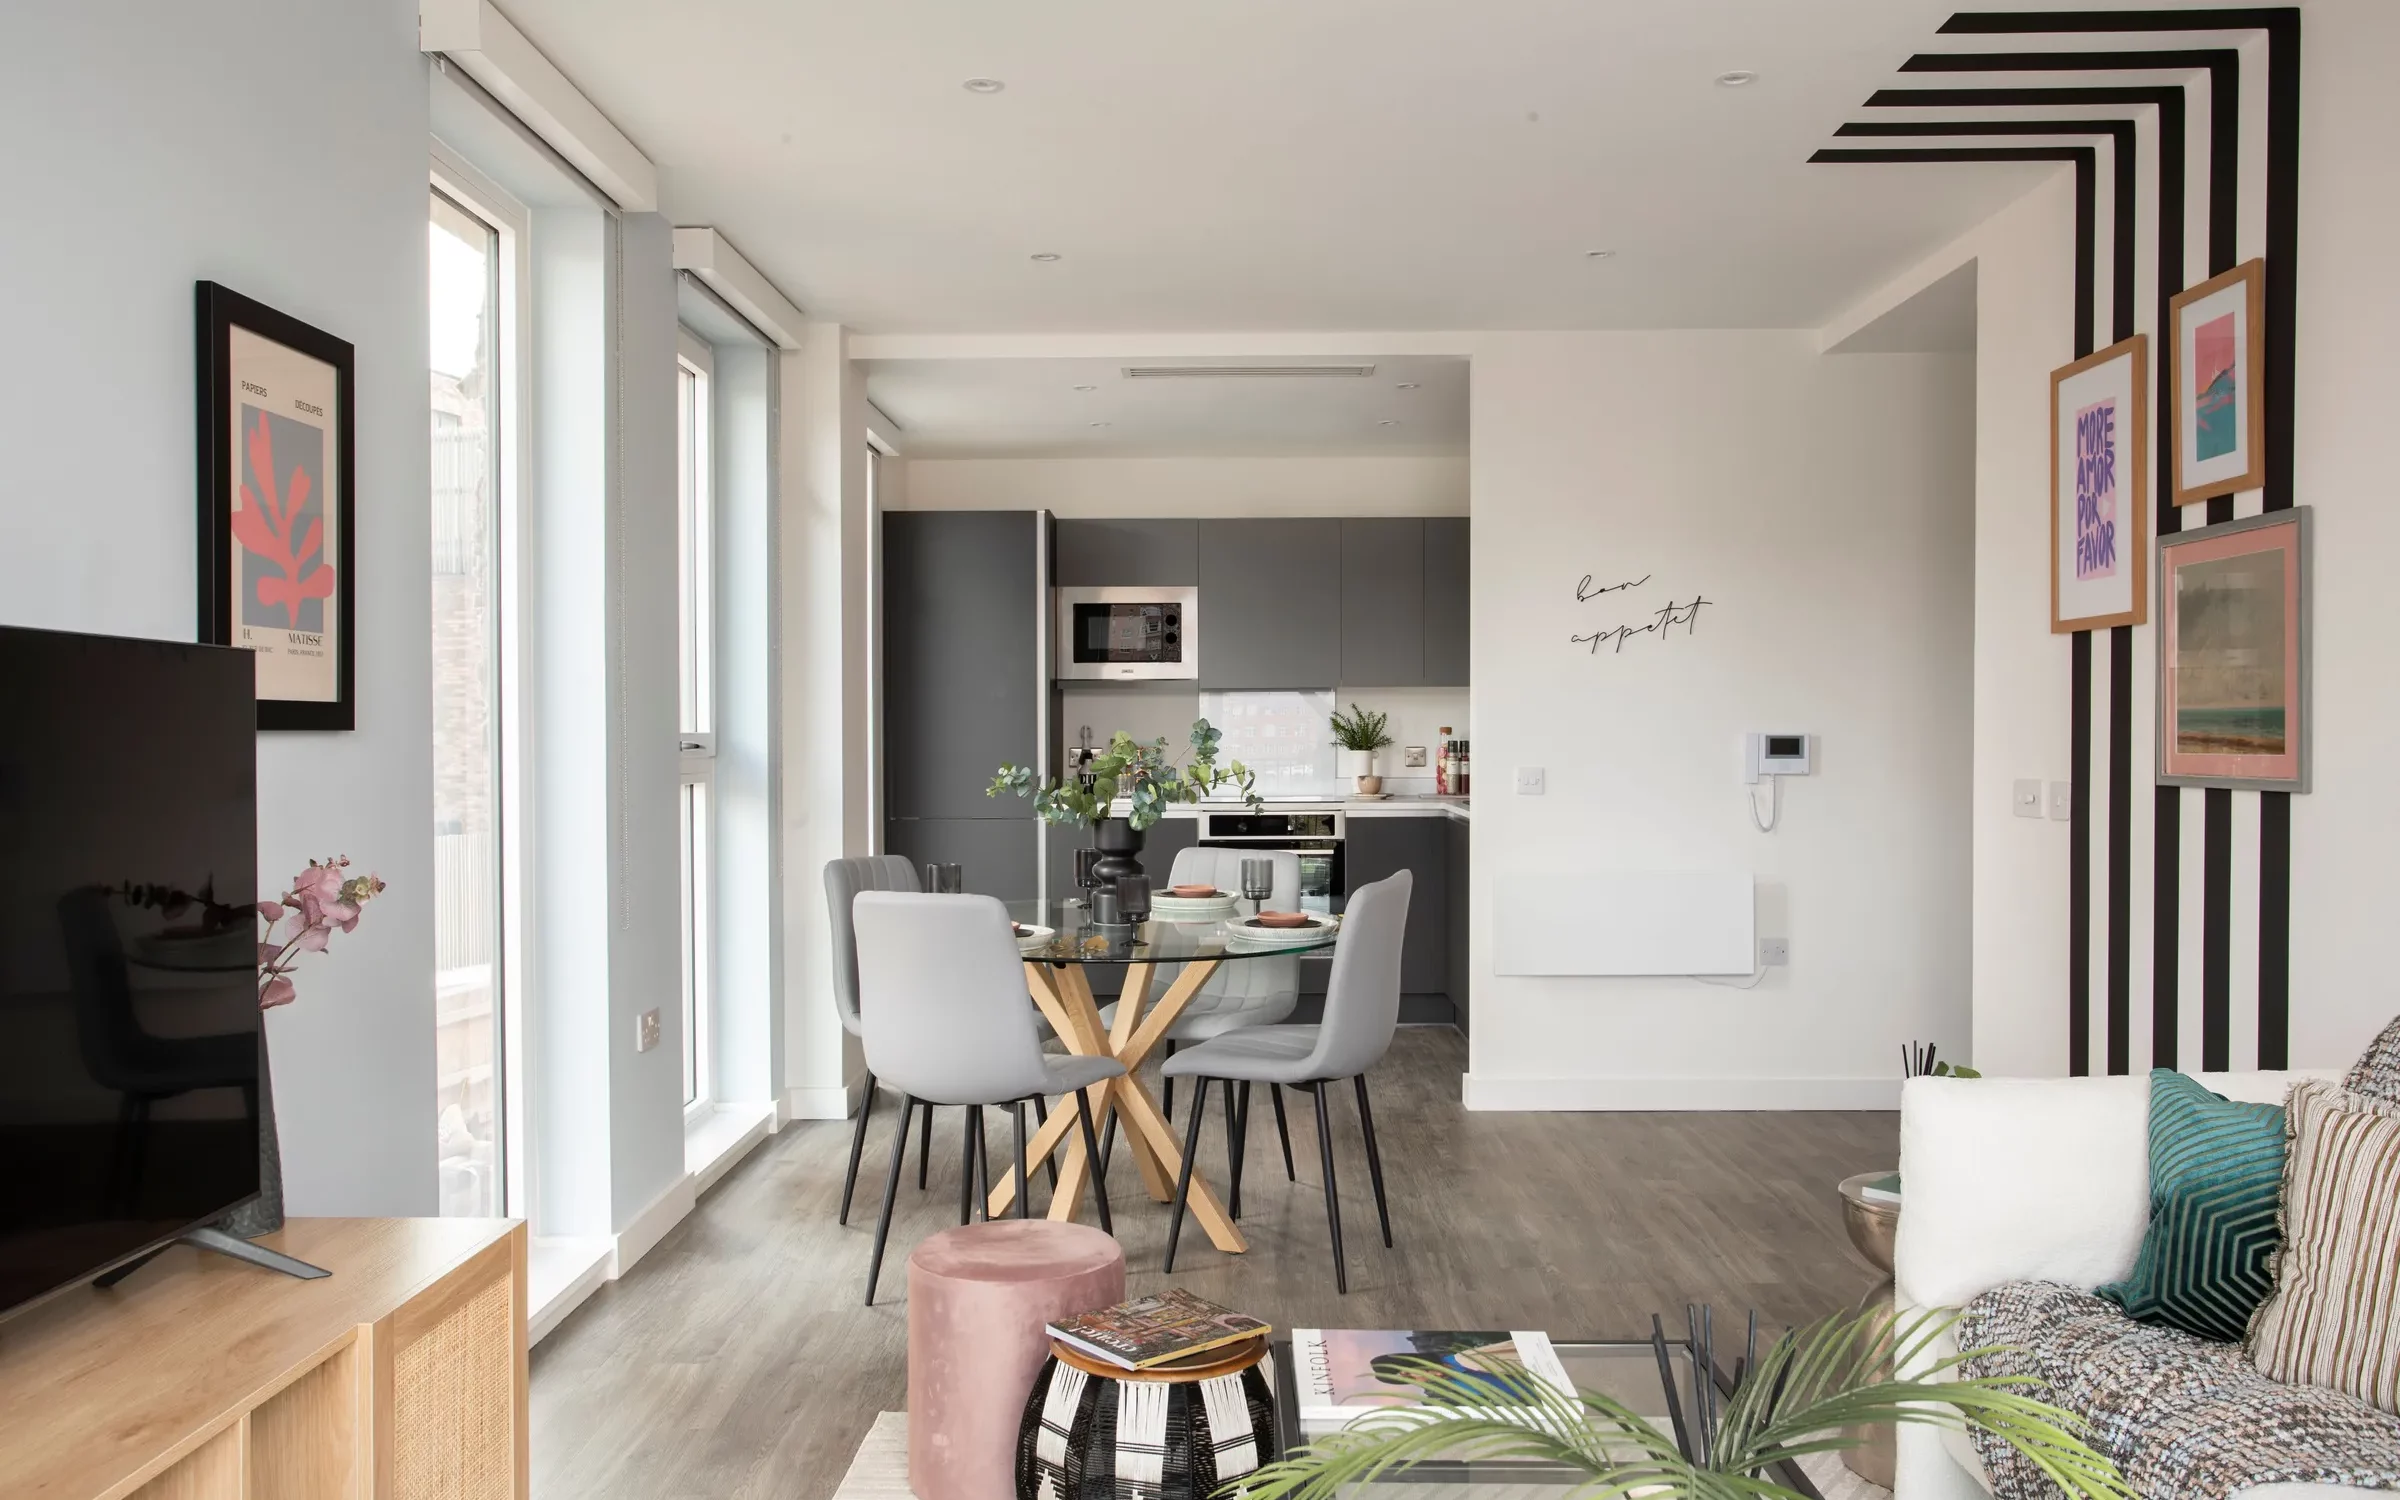 An image of Islington Wharf by Latimer by Clarion Housing Group- available to purchase through Shared Ownership on Share to Buy!